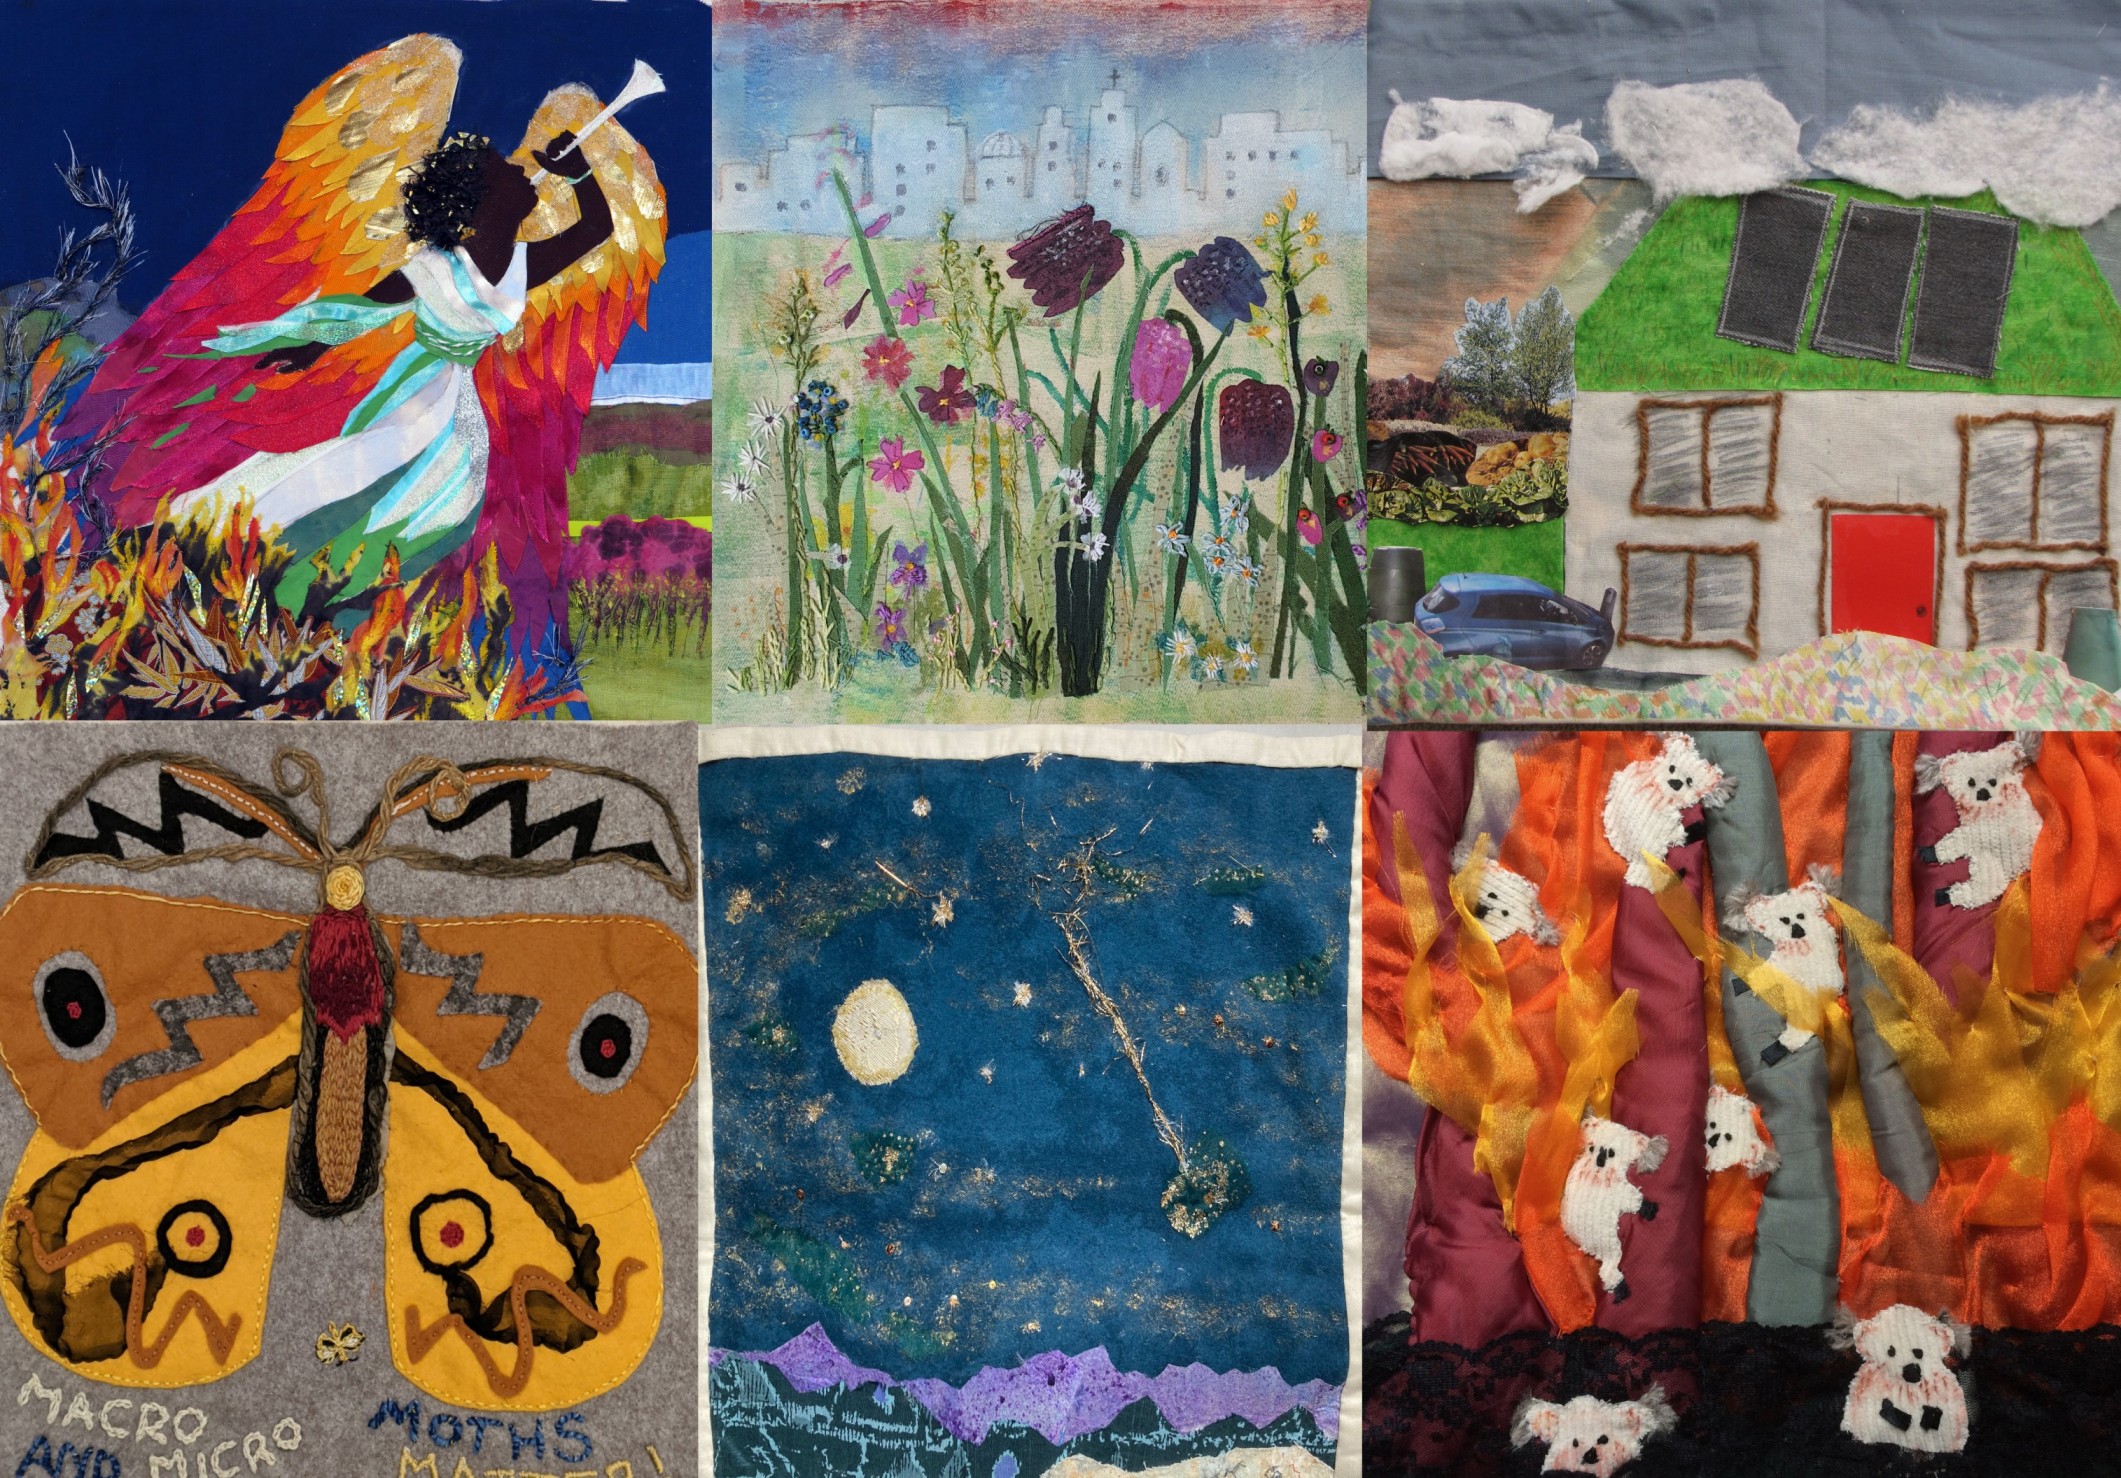 Some of the panels created for the Loving Earth Project